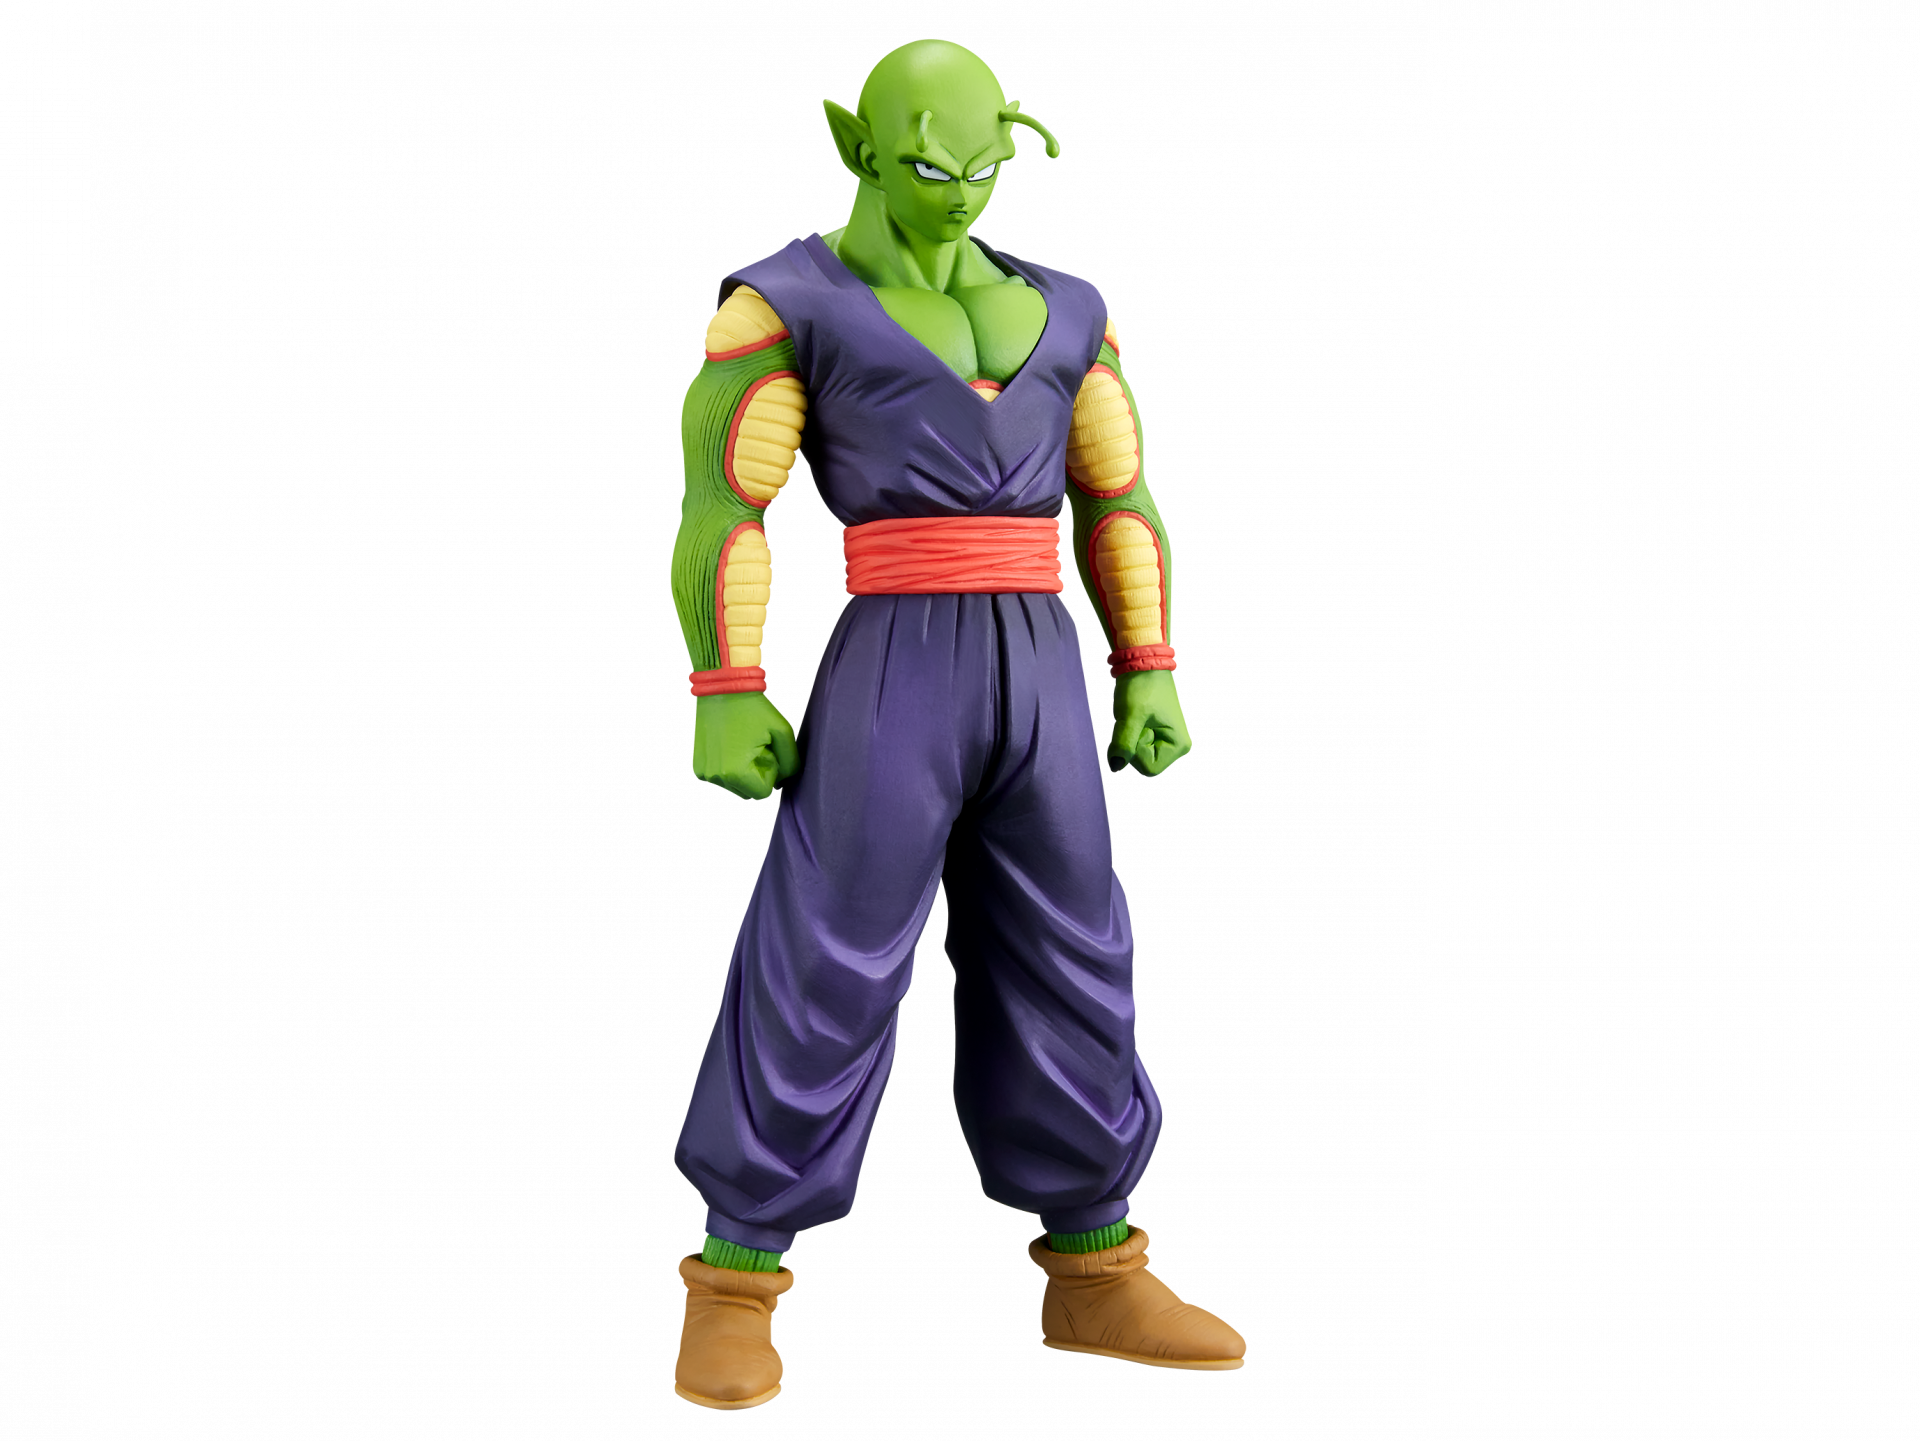 Dragon Ball Super: SUPER HERO Movie Characters Coming Soon to Crane Games!